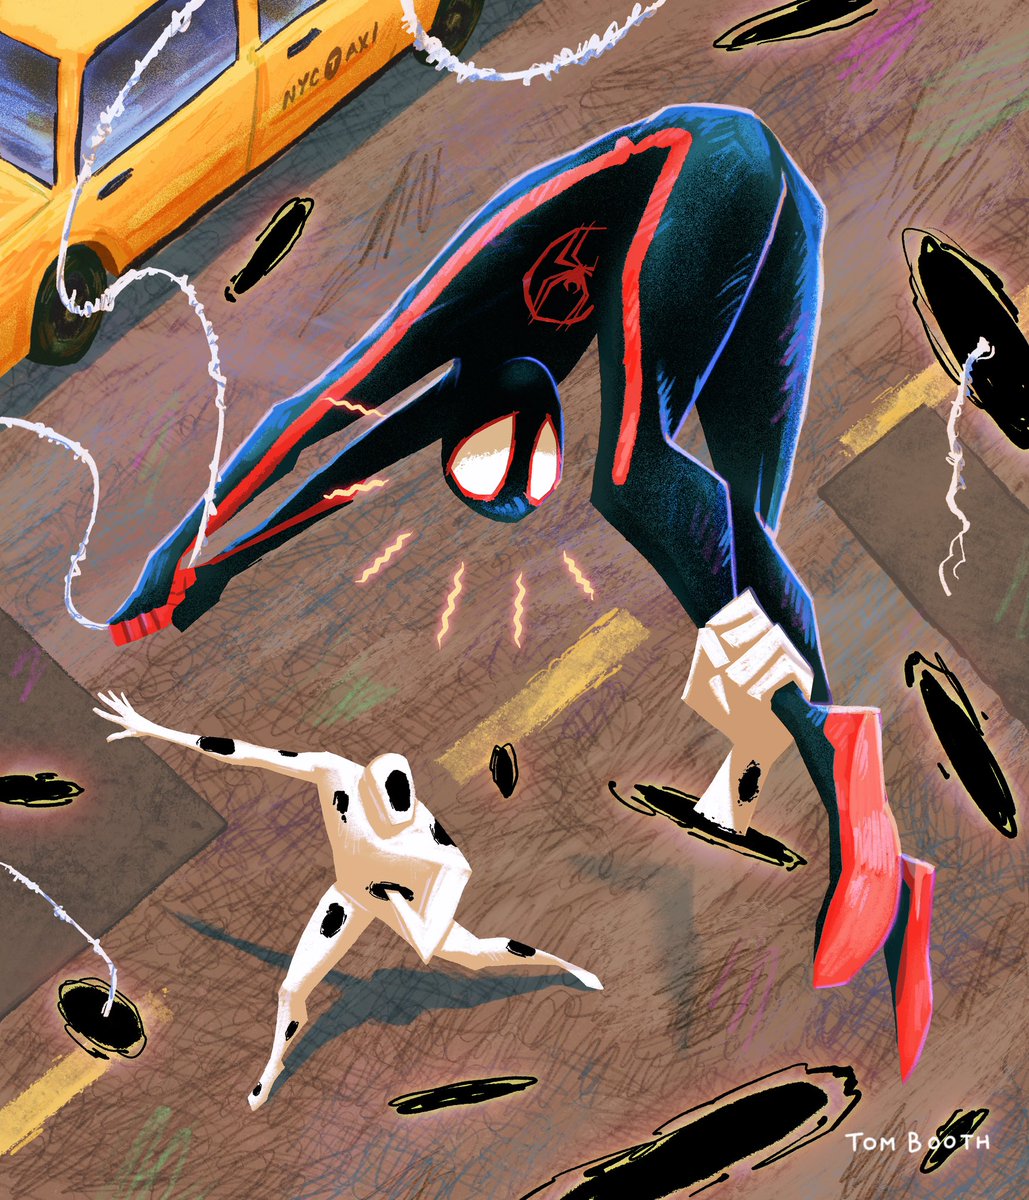 Can’t wait to see it tonight (NO SPOILERS PLEASE)! Congratulations to all who helped make what looks to be an incredible achievement on all fronts! #AcrossTheSpiderVerse